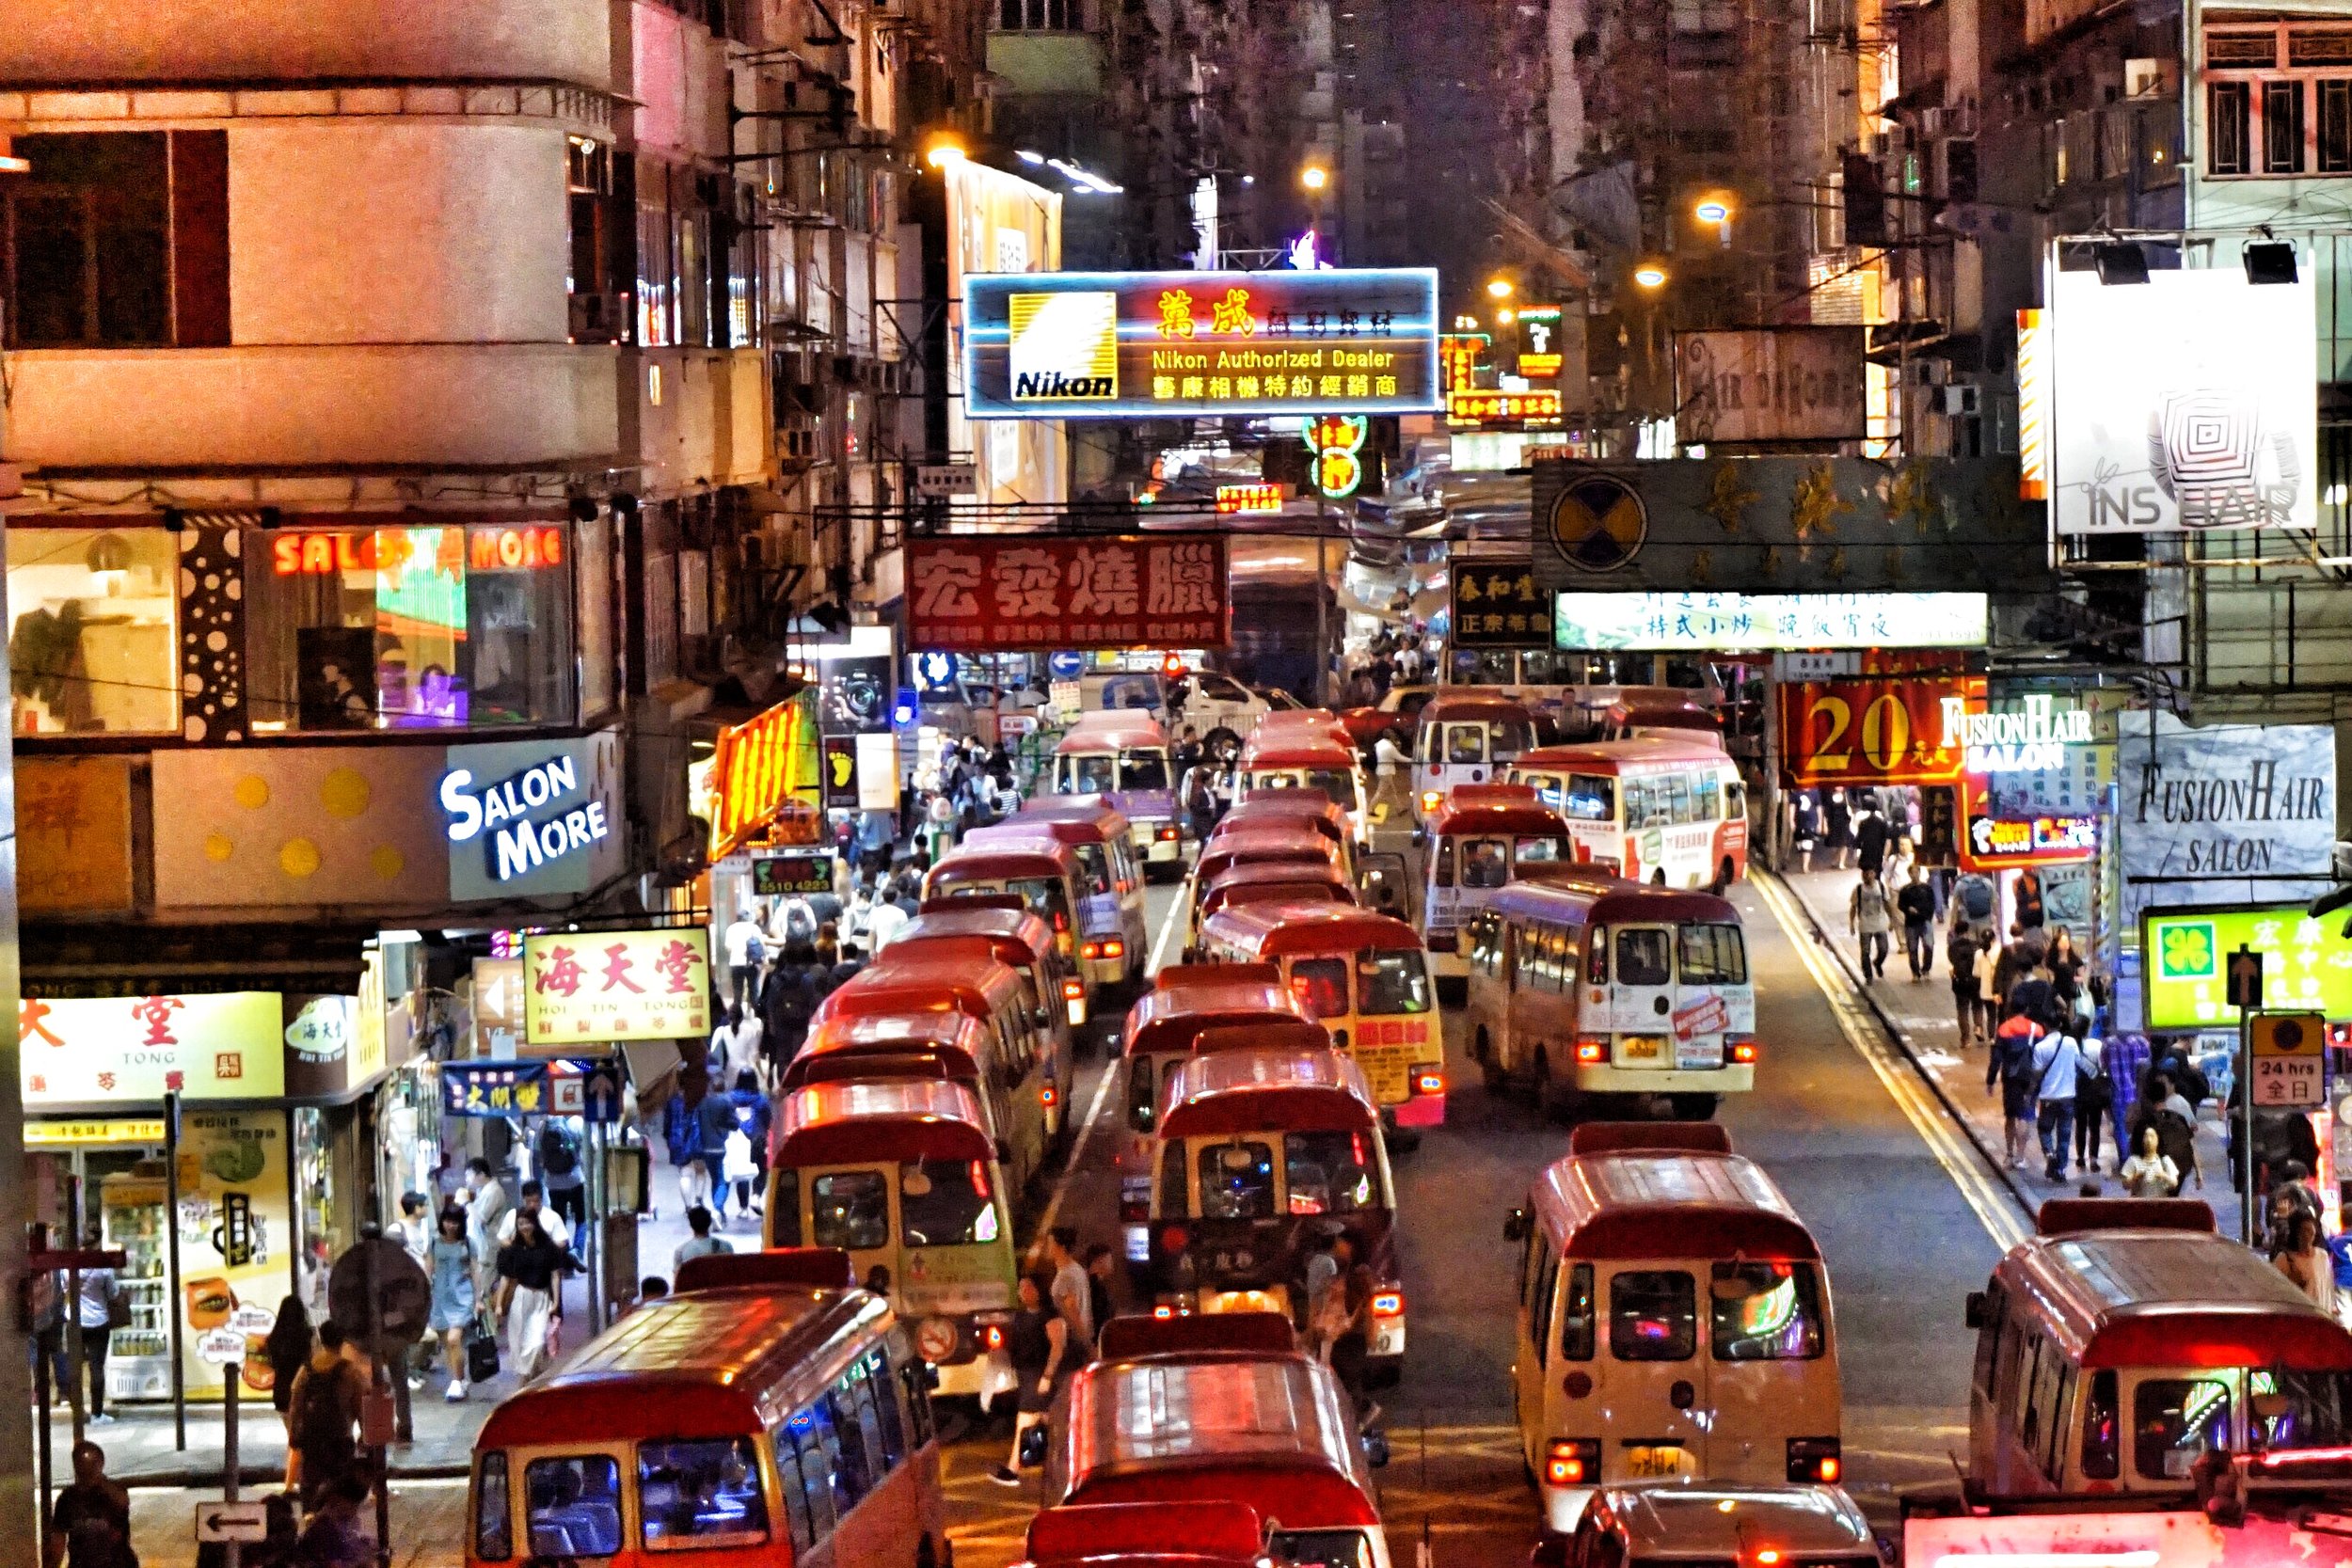 Walk through the streets of Mong Kok on your personalised night tour of kowloon and soak up the atmosphere of the neon lights.